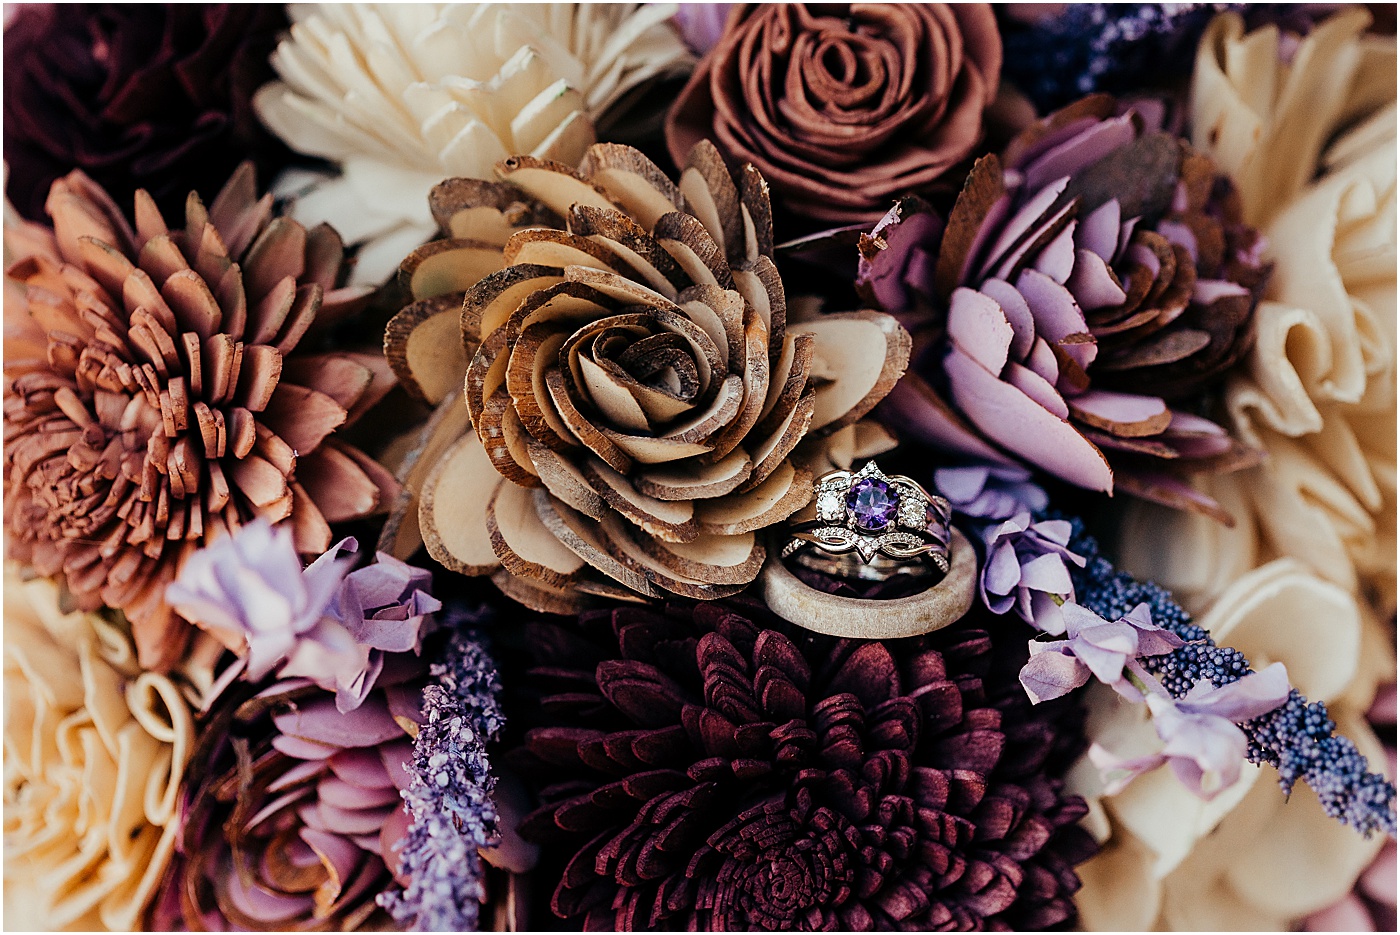 Wedding ring details | Photo by Megan Montalvo Photography